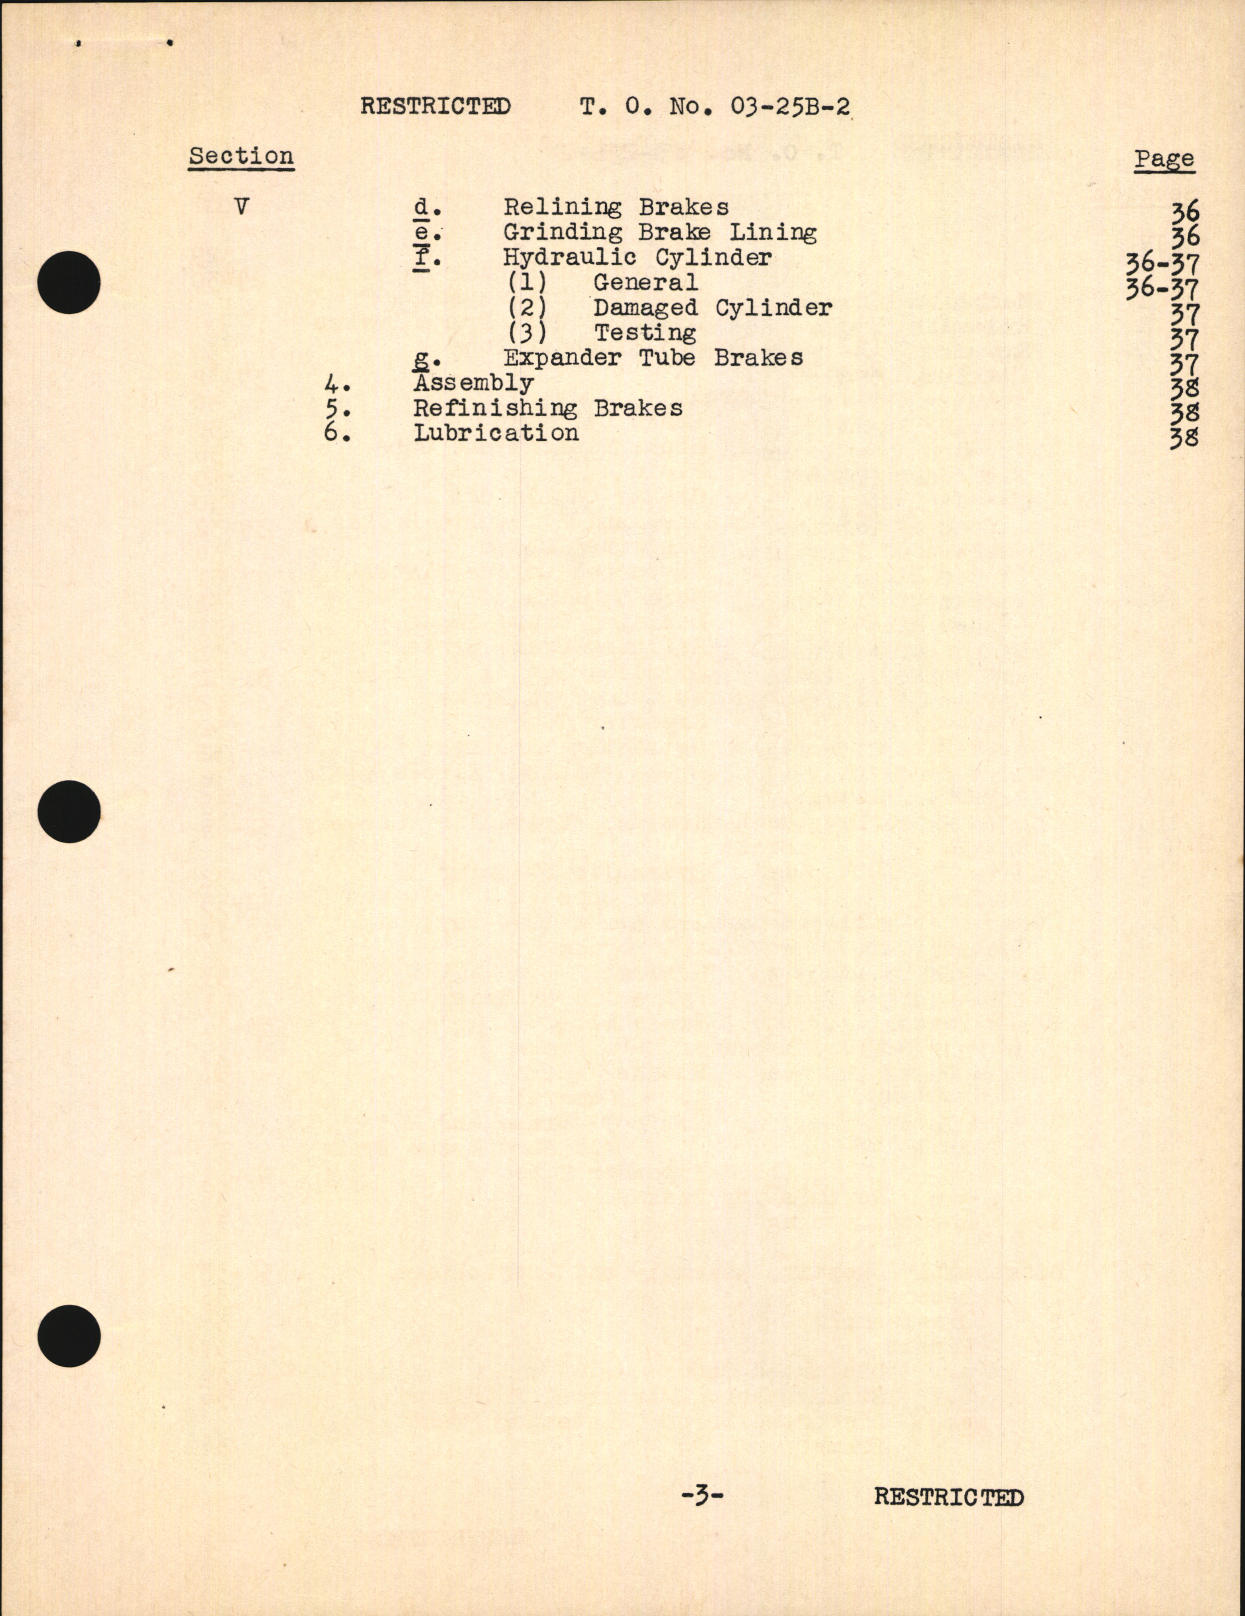 Sample page 5 from AirCorps Library document: Handbook of Instructions with Parts Catalog for Brakes Manufactured by Hayes Industries